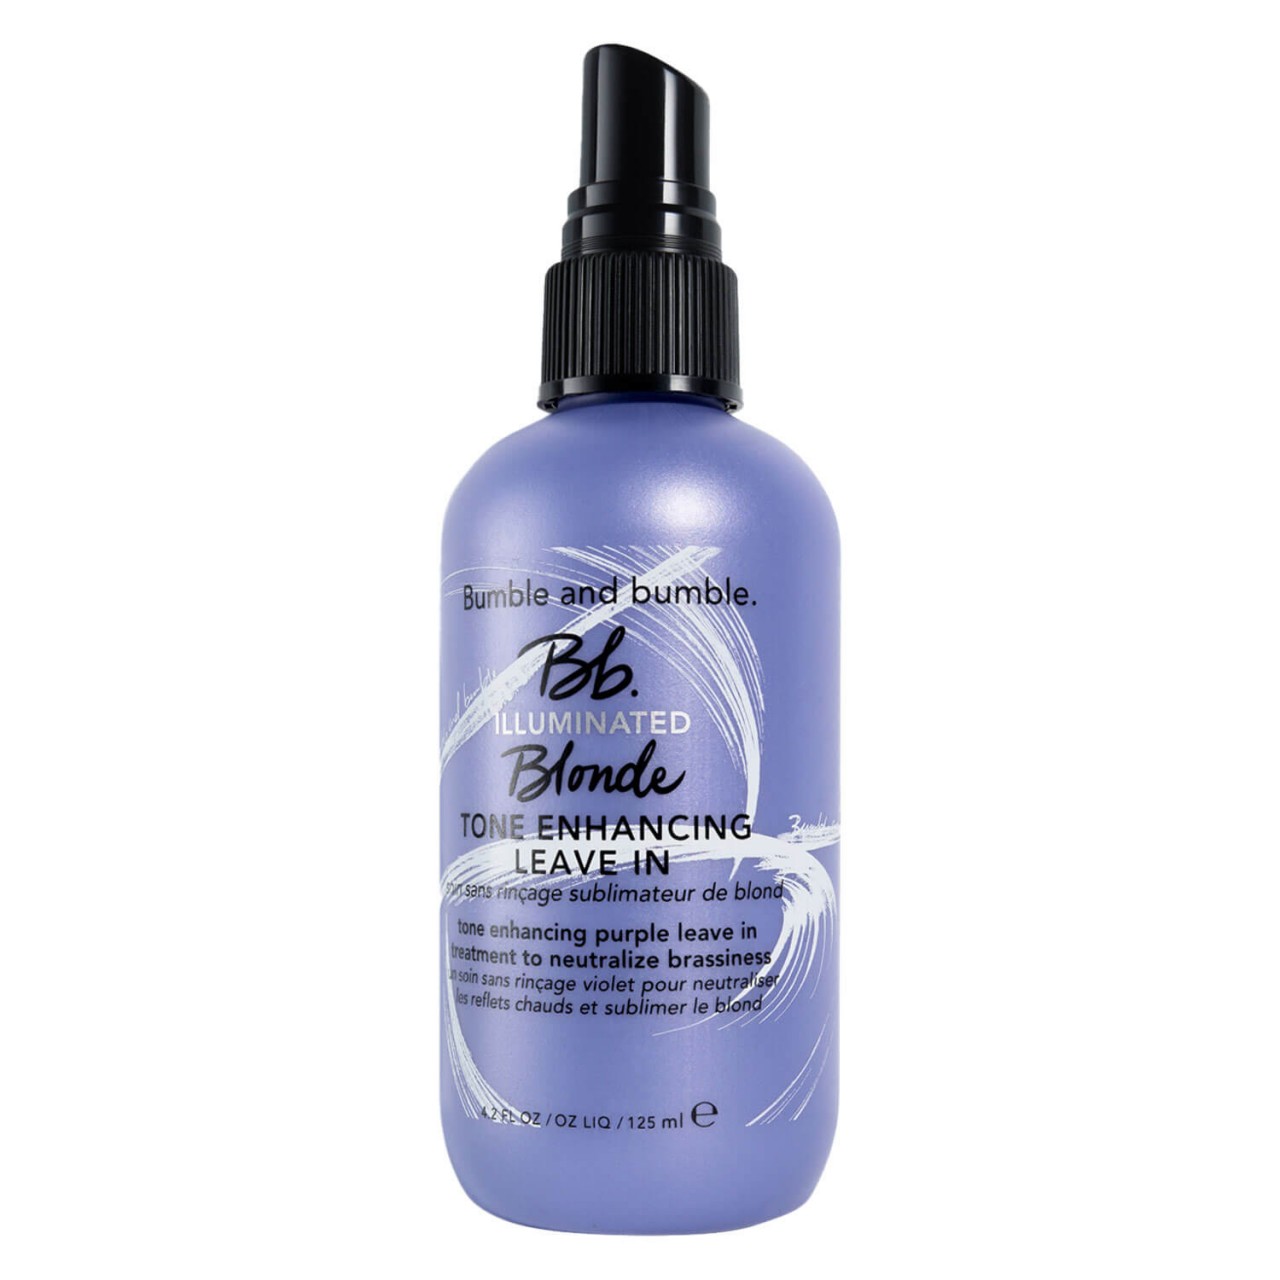 Bb. Illuminated Blonde - Tone Enhancing Leave In von Bumble and bumble.